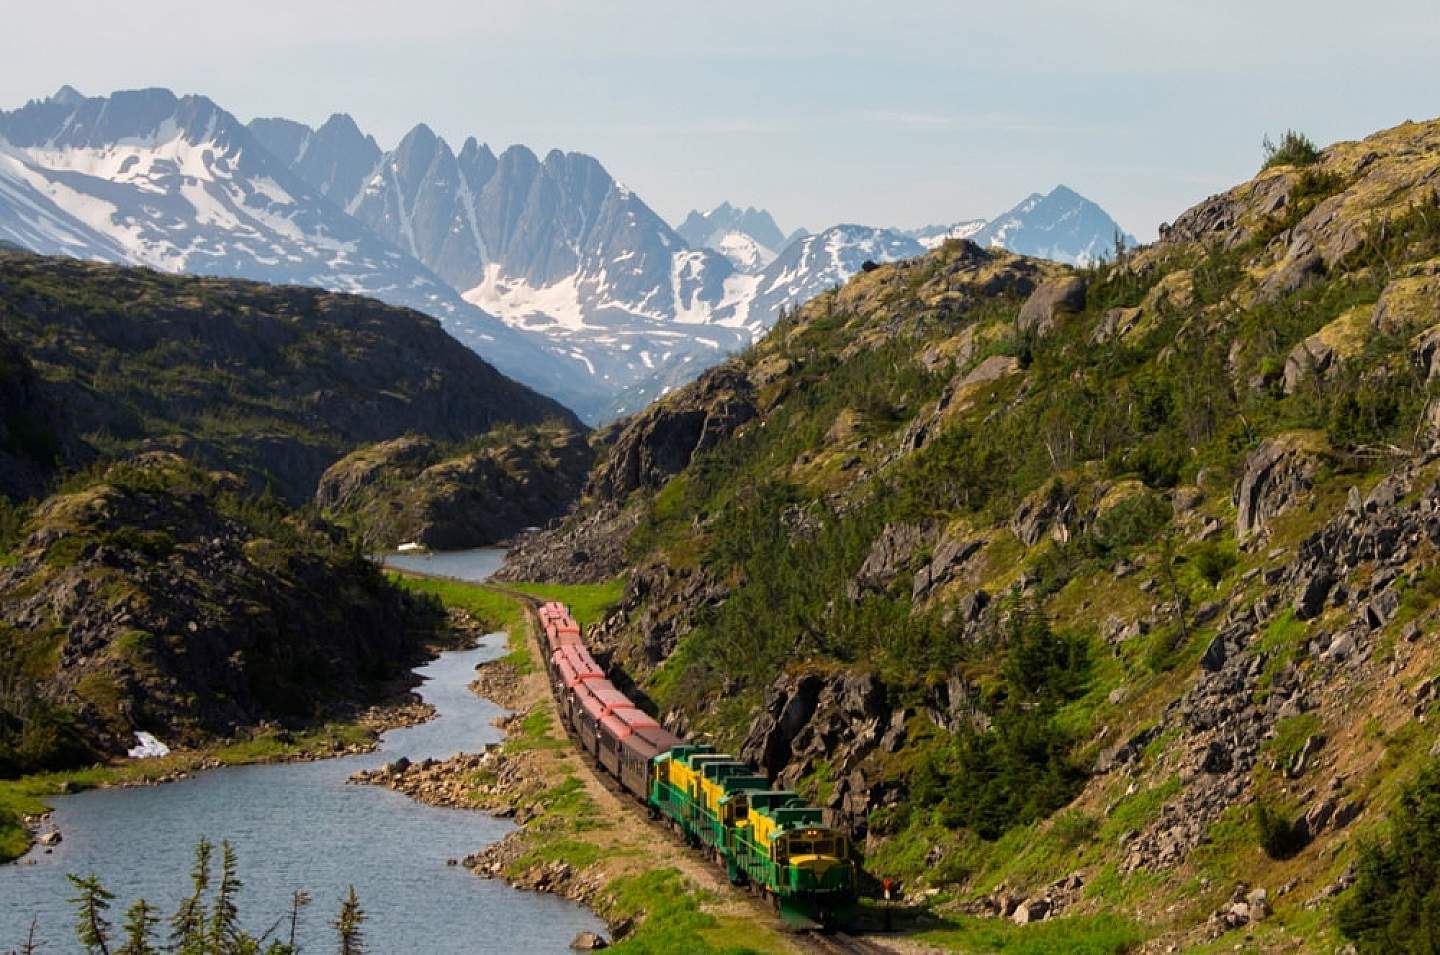 Enjoy the views upon the White Pass Train and Yukon Route Sightseeing